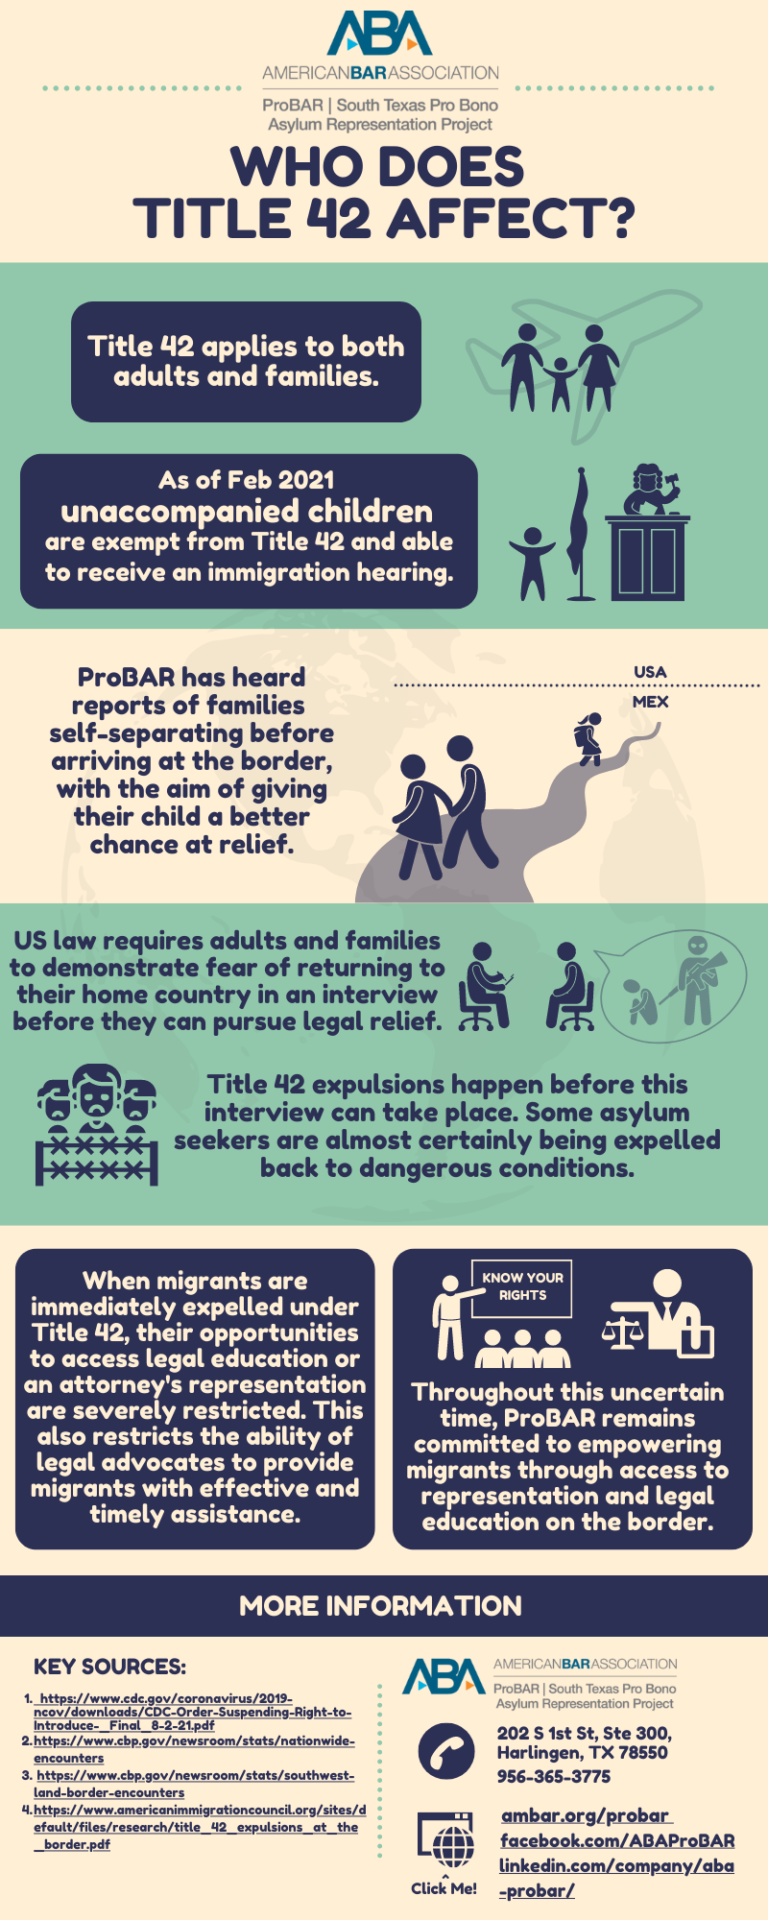 WHO DOES TITLE 42 AFFECT? Title 42 applies to both adults and families. As of February 2021 unaccompanied children are exempt from Title 42 and able to recieve an immmigration hearing. ProBAR has heard reports of families self-separating before arriving at the border, with the aim of giving their child a better chance at relief. US law requires adults and families to demonstrate fear of returning to their home country in an interview before they can pursue legal relief. Title 42 expulsions happen before this interview can take place. Some asylum seekers are almost certainly being expelled back to dangerous conditions. When migrants are immediately expelled under Title 42, their opportunities to access legal education or an attorney's representation are severely restricted. This also restricts the ability of legal advocates to provide migrants with effective and timely assistance. Throughout this uncertain time, ProBAR remains committed to empowering migrants through access to representation and legal education on the border. MORE INFORMATION KEY SOURCES: Title 42 applies to both adults and families. MORE INFORMATION As of Feb 2021 are exempt from Title 42 and able to receive an immigration hearing. WHO DOES TITLE 42 AFFECT? unaccompanied children https://www.cdc.gov/coronavirus/2019- ncov/downloads/CDC-Order-Suspending-Right-toIntroduce-_Final_8-2-21.pdf https://www.cbp.gov/newsroom/stats/nationwideencounters https://www.cbp.gov/newsroom/stats/southwestland-border-encounters https://www.americanimmigrationcouncil.org/sites/d efault/files/research/title_42_expulsions_at_the _border.pdf 202 S 1st St, Ste 300, Harlingen, TX 78550 956-365-3775 ambar.org/probar facebook.com/ABAProBAR linkedin.com/company/aba -probar/